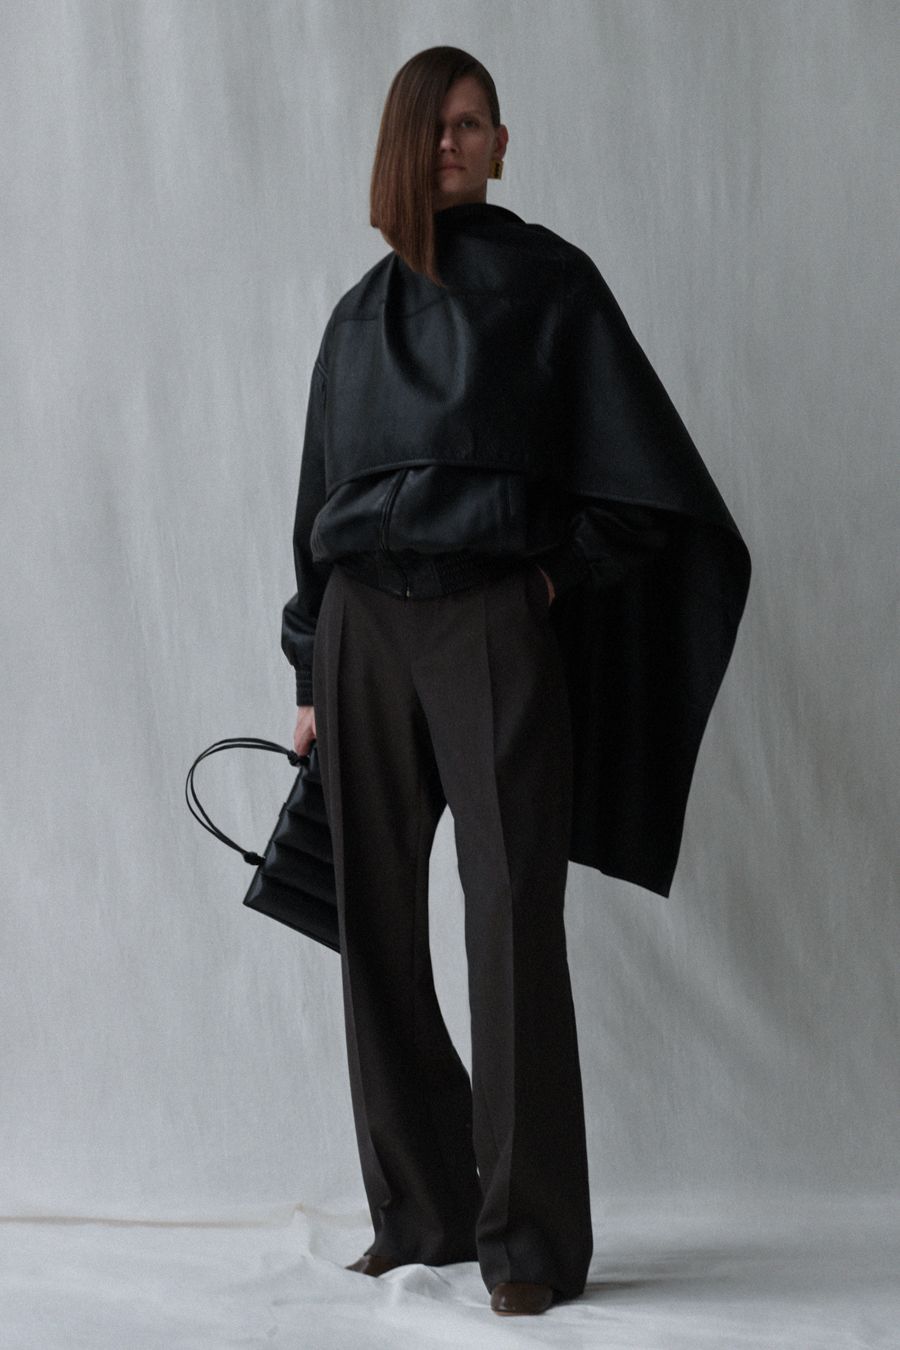 Cathy Horyn Previews Phoebe Philo's New Collection